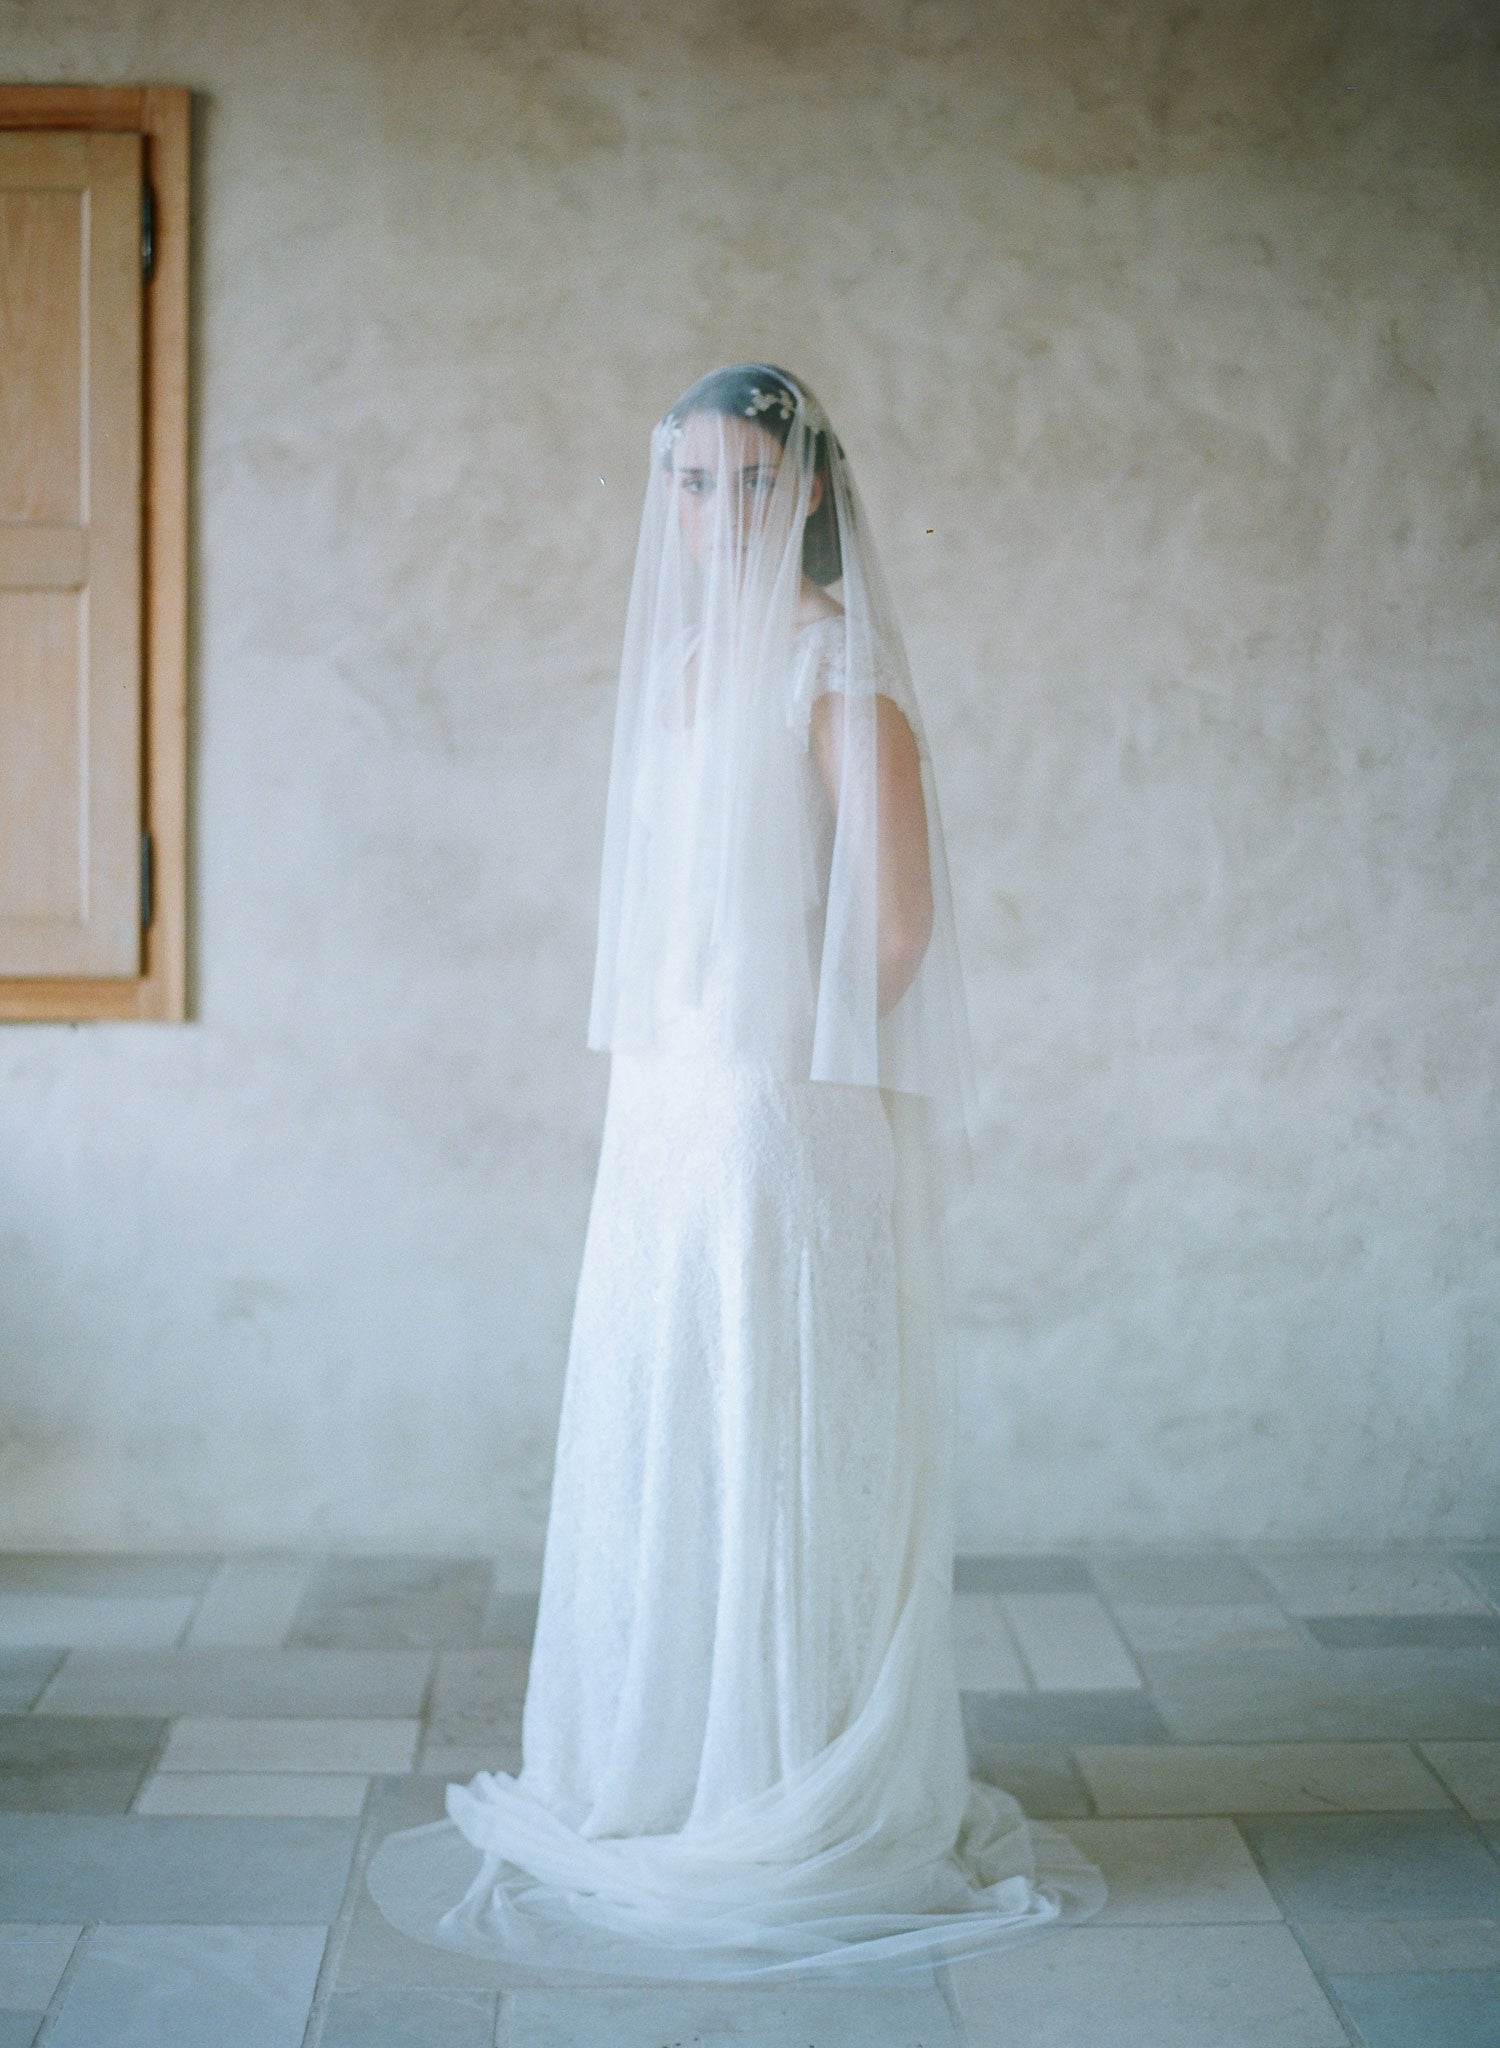 Twigs & Honey Simple Cathedral or Chapel Length Veil - Style #357 Light Ivory / 26 (Length As Pictured) / Chapel (90)